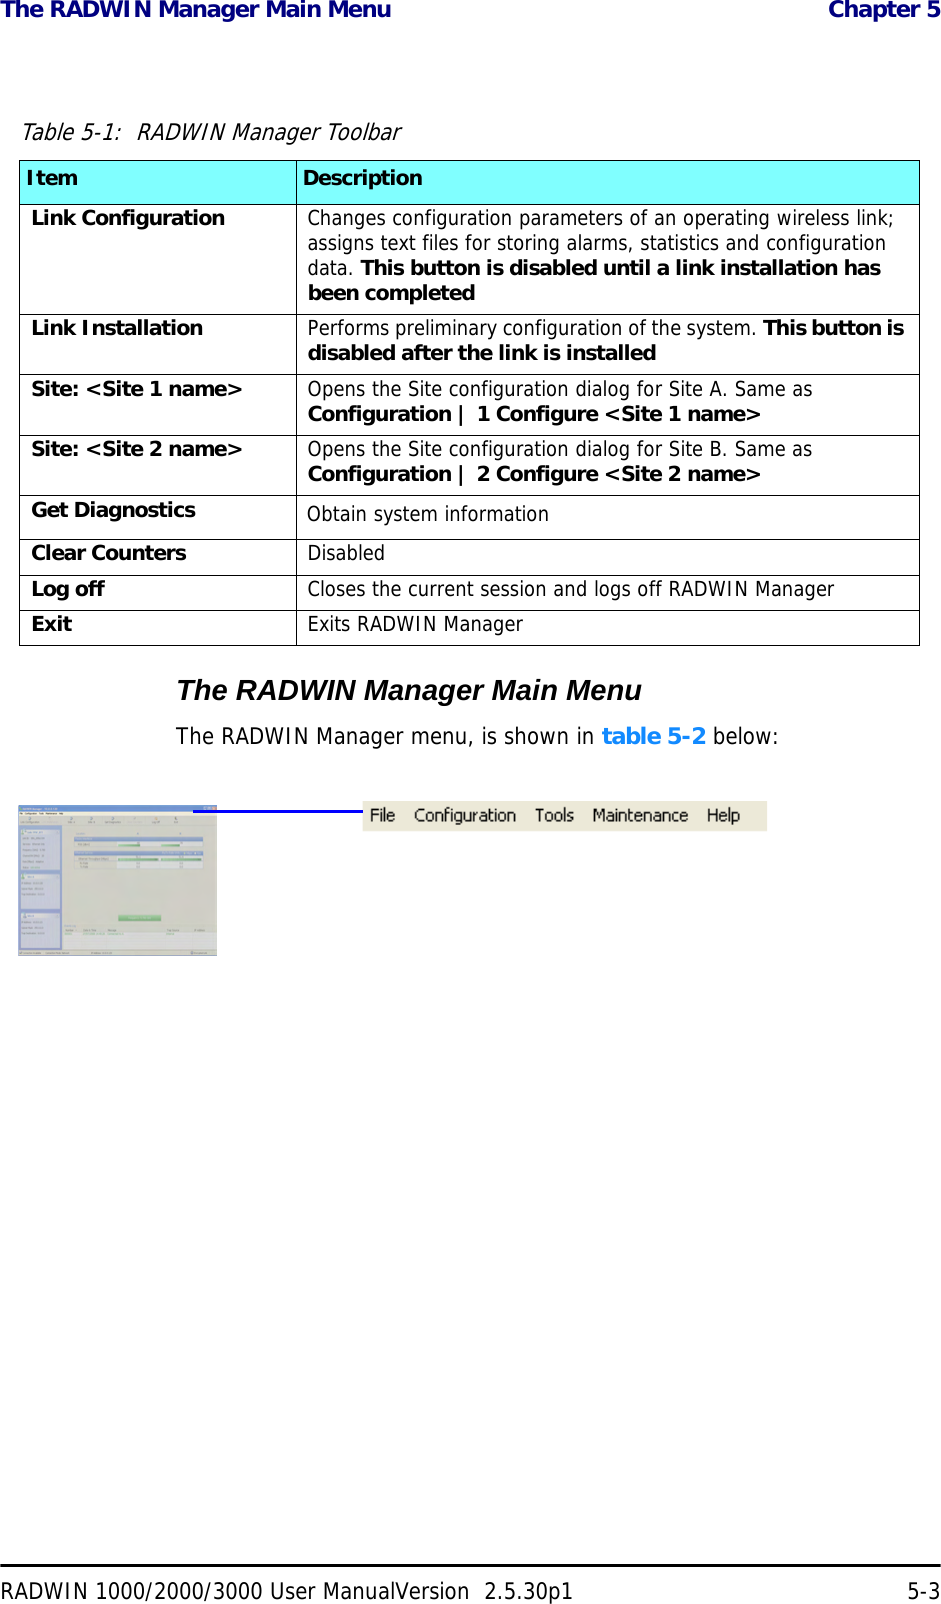 The RADWIN Manager Main Menu  Chapter 5RADWIN 1000/2000/3000 User ManualVersion  2.5.30p1 5-3The RADWIN Manager Main MenuThe RADWIN Manager menu, is shown in table 5-2 below:Table 5-1:  RADWIN Manager ToolbarItem DescriptionLink Configuration Changes configuration parameters of an operating wireless link; assigns text files for storing alarms, statistics and configuration data. This button is disabled until a link installation has been completedLink Installation Performs preliminary configuration of the system. This button is disabled after the link is installedSite: &lt;Site 1 name&gt; Opens the Site configuration dialog for Site A. Same as Configuration | 1 Configure &lt;Site 1 name&gt;Site: &lt;Site 2 name&gt; Opens the Site configuration dialog for Site B. Same as Configuration | 2 Configure &lt;Site 2 name&gt;Get Diagnostics Obtain system informationClear Counters DisabledLog off Closes the current session and logs off RADWIN ManagerExit Exits RADWIN Manager